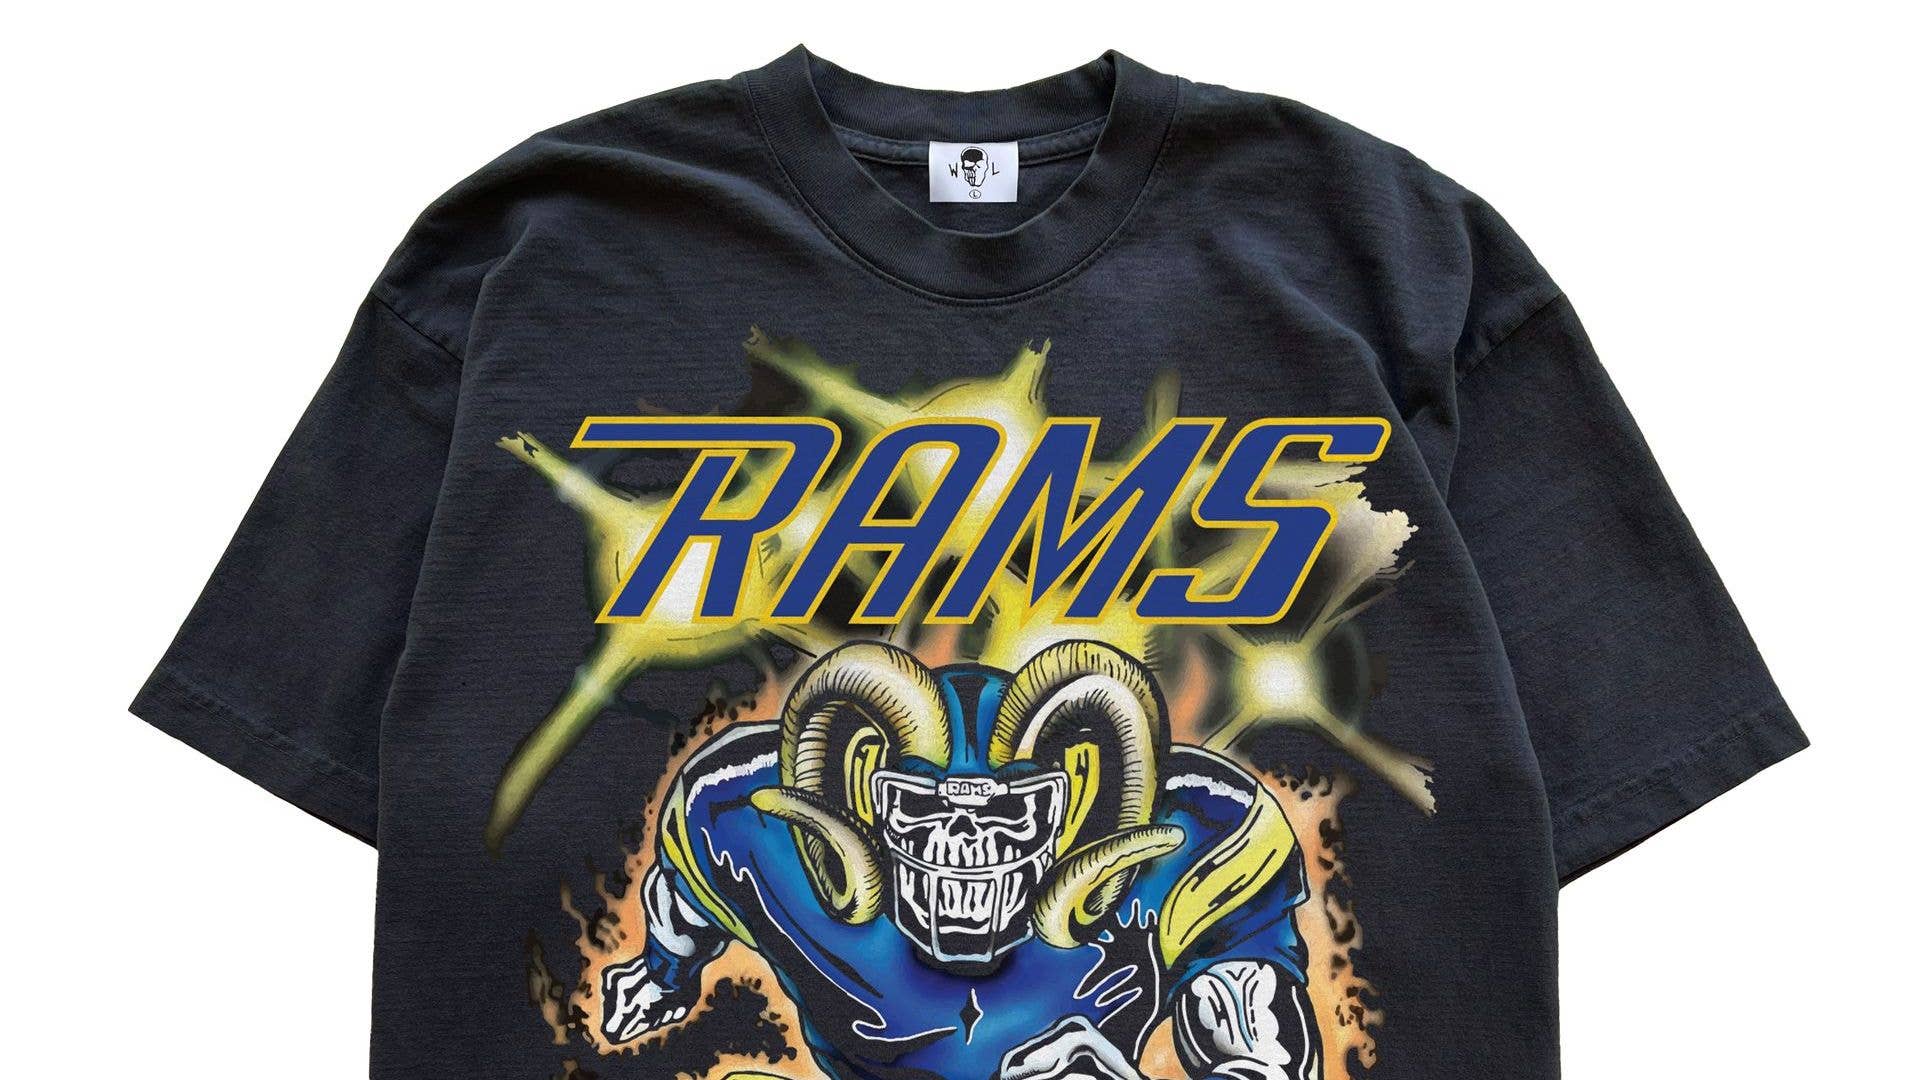 Hottest 2022 Los Angeles Rams Super Bowl championship gear includes,  t-shirts, hats, hoodies 